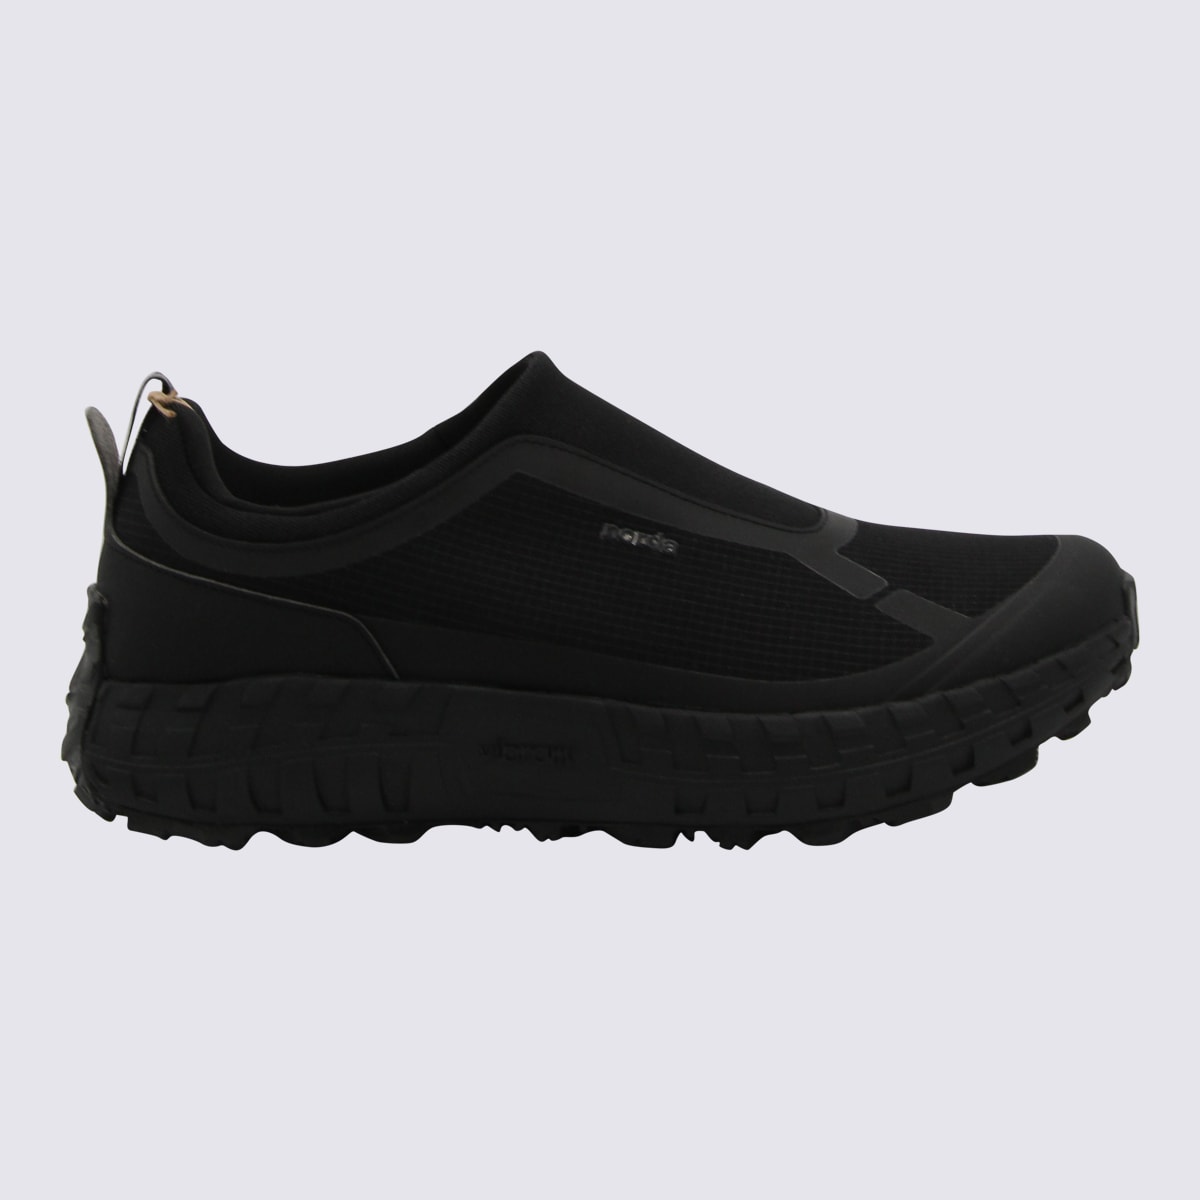 Norda Black The 003 M Pitch Sneakers